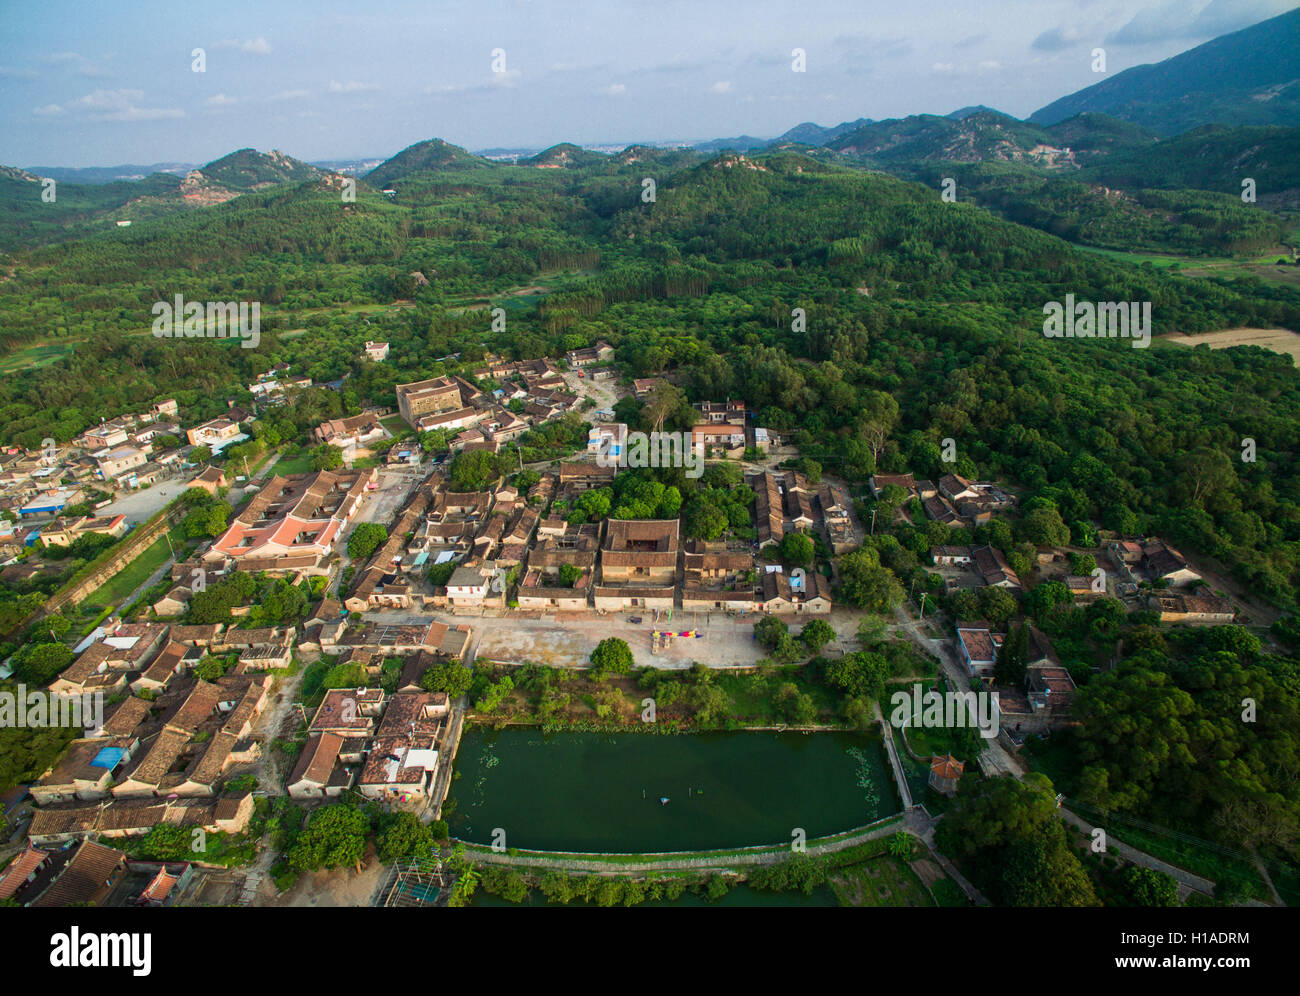 Zhangpu. 22nd Sep, 2016. Photo taken on Sept. 22, 2016 shows an overlook of Zhaojiabao in Zhangpu County, southeast China's Fujian Province. Zhaojiabao is a fortress built during the Ming Dynasty (1368-1644) by descendants of the Zhao imperial family of the Northern Song Dynasty (960-1127). It is a copy of the structure of Bianjing City, ancient capital of the Northern Song Dynasty. © Song Weiwei/Xinhua/Alamy Live News Stock Photo